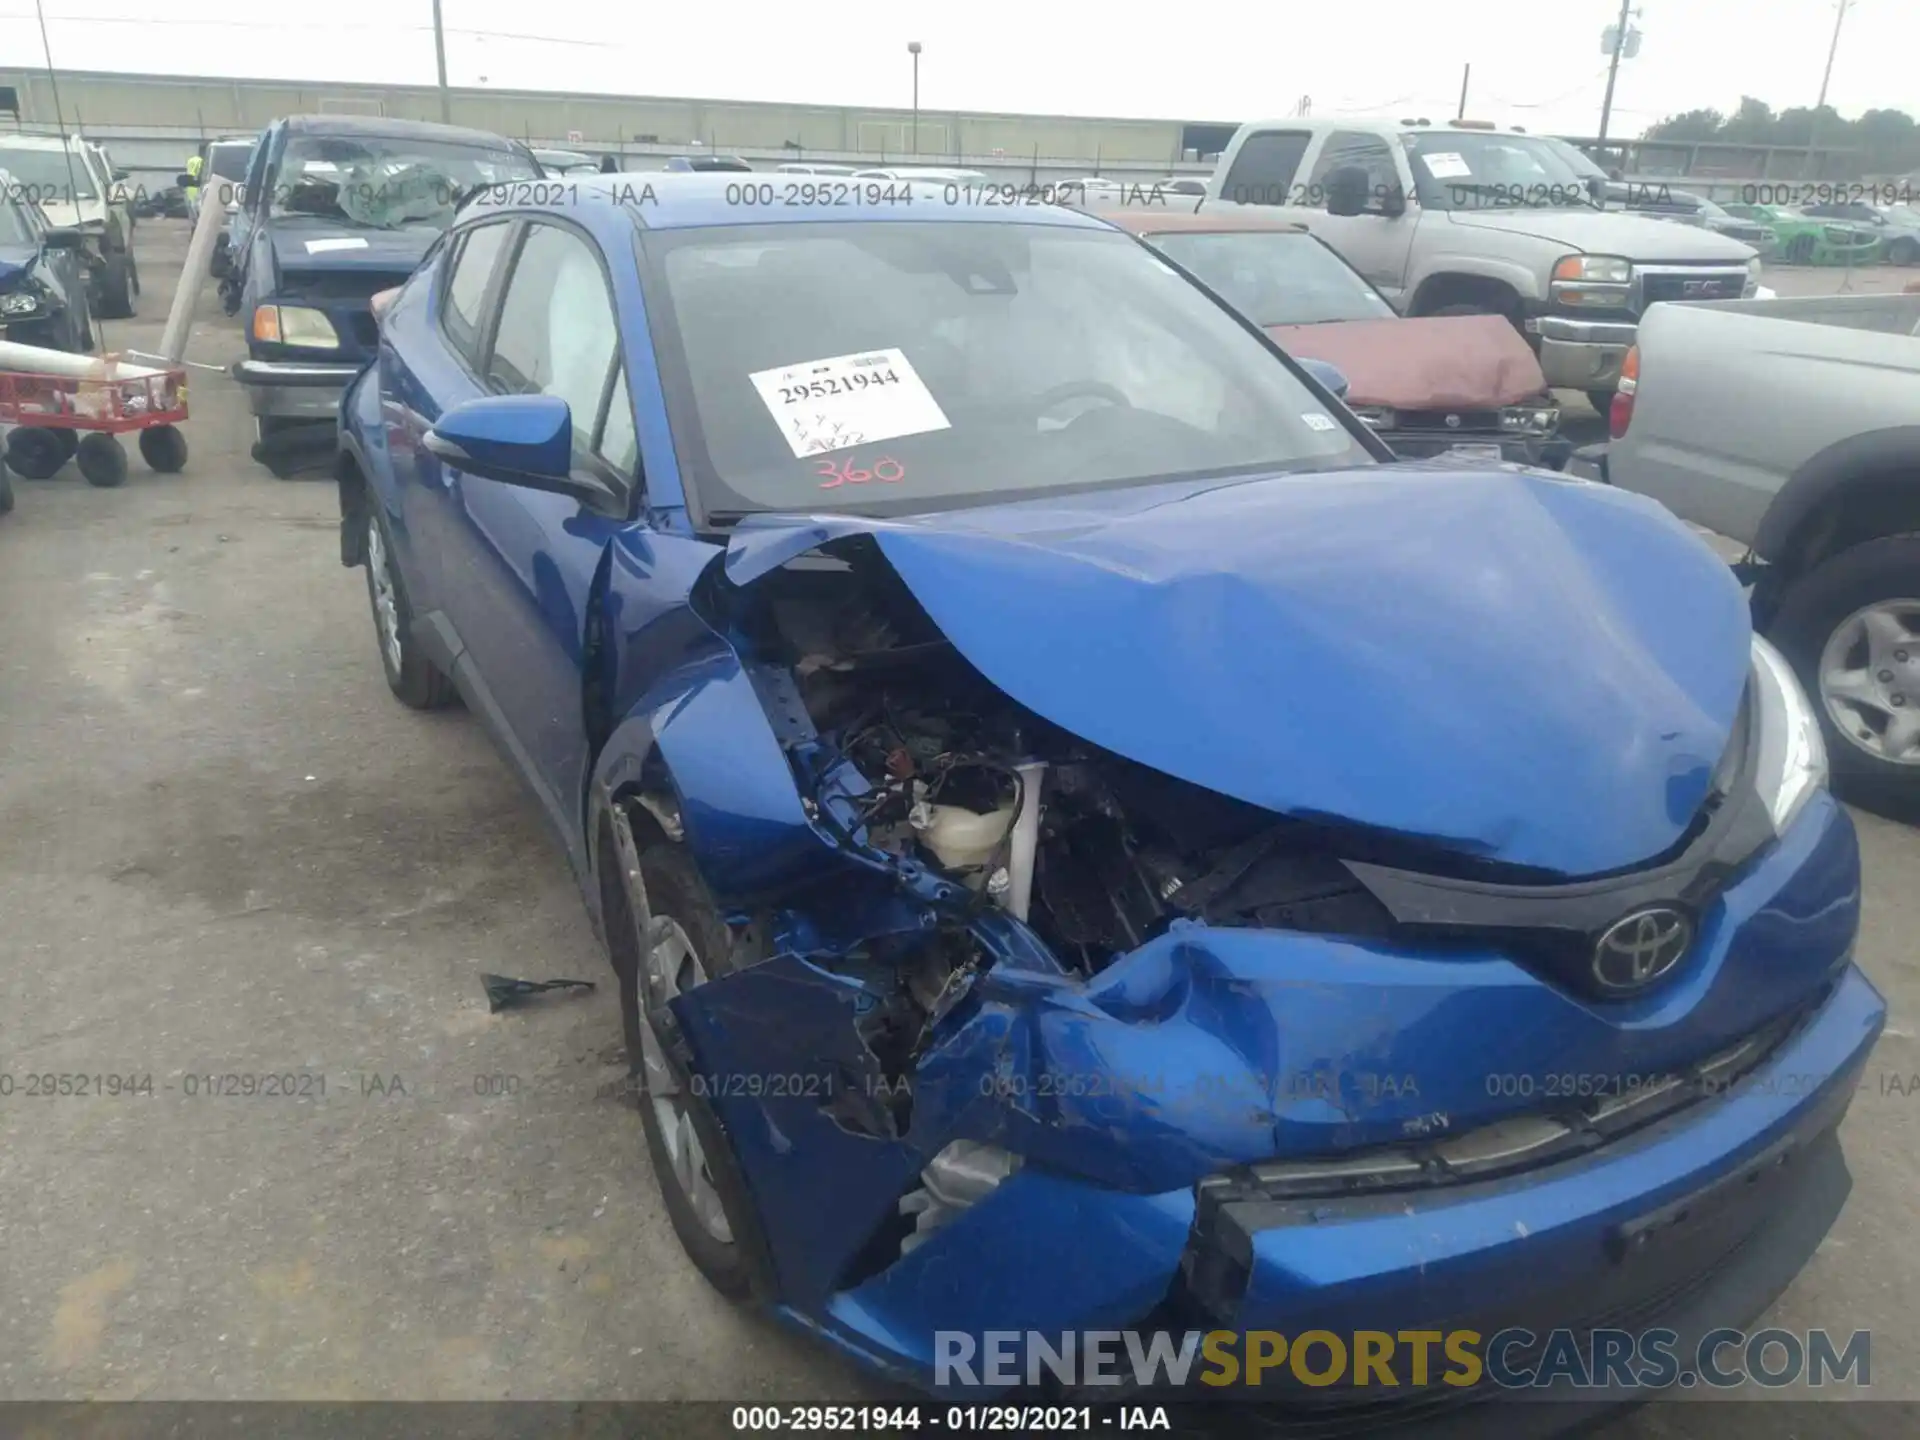 6 Photograph of a damaged car NMTKHMBXXKR081834 TOYOTA C-HR 2019